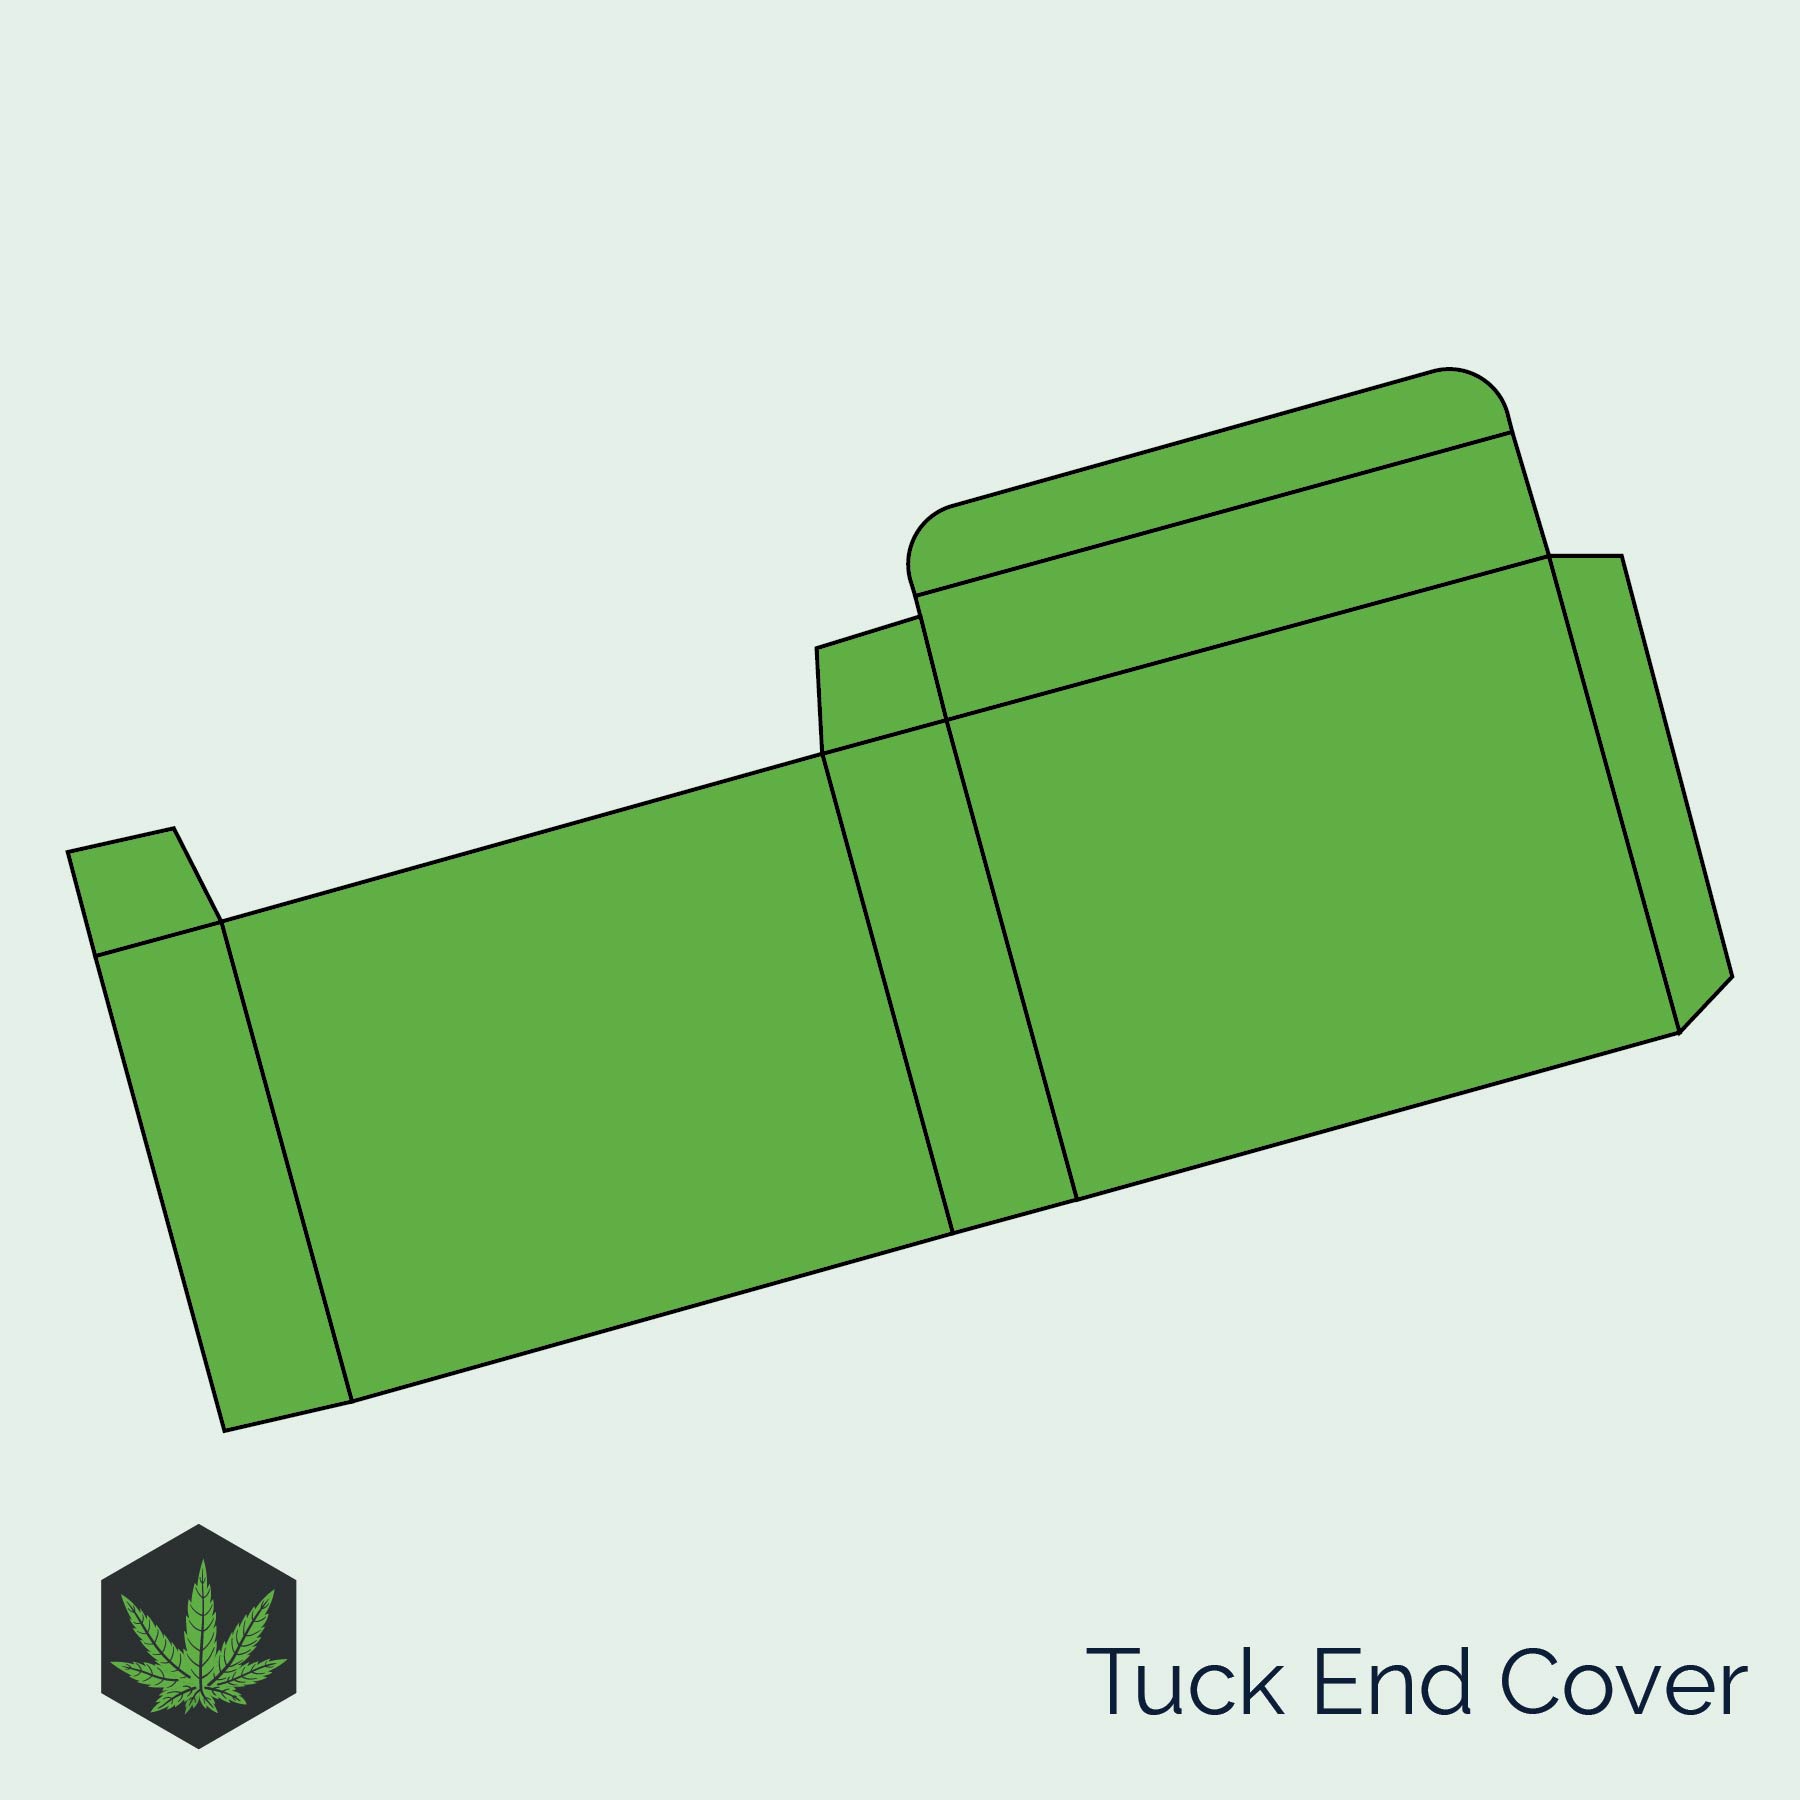 Tuck End Cover Box Manufacturer